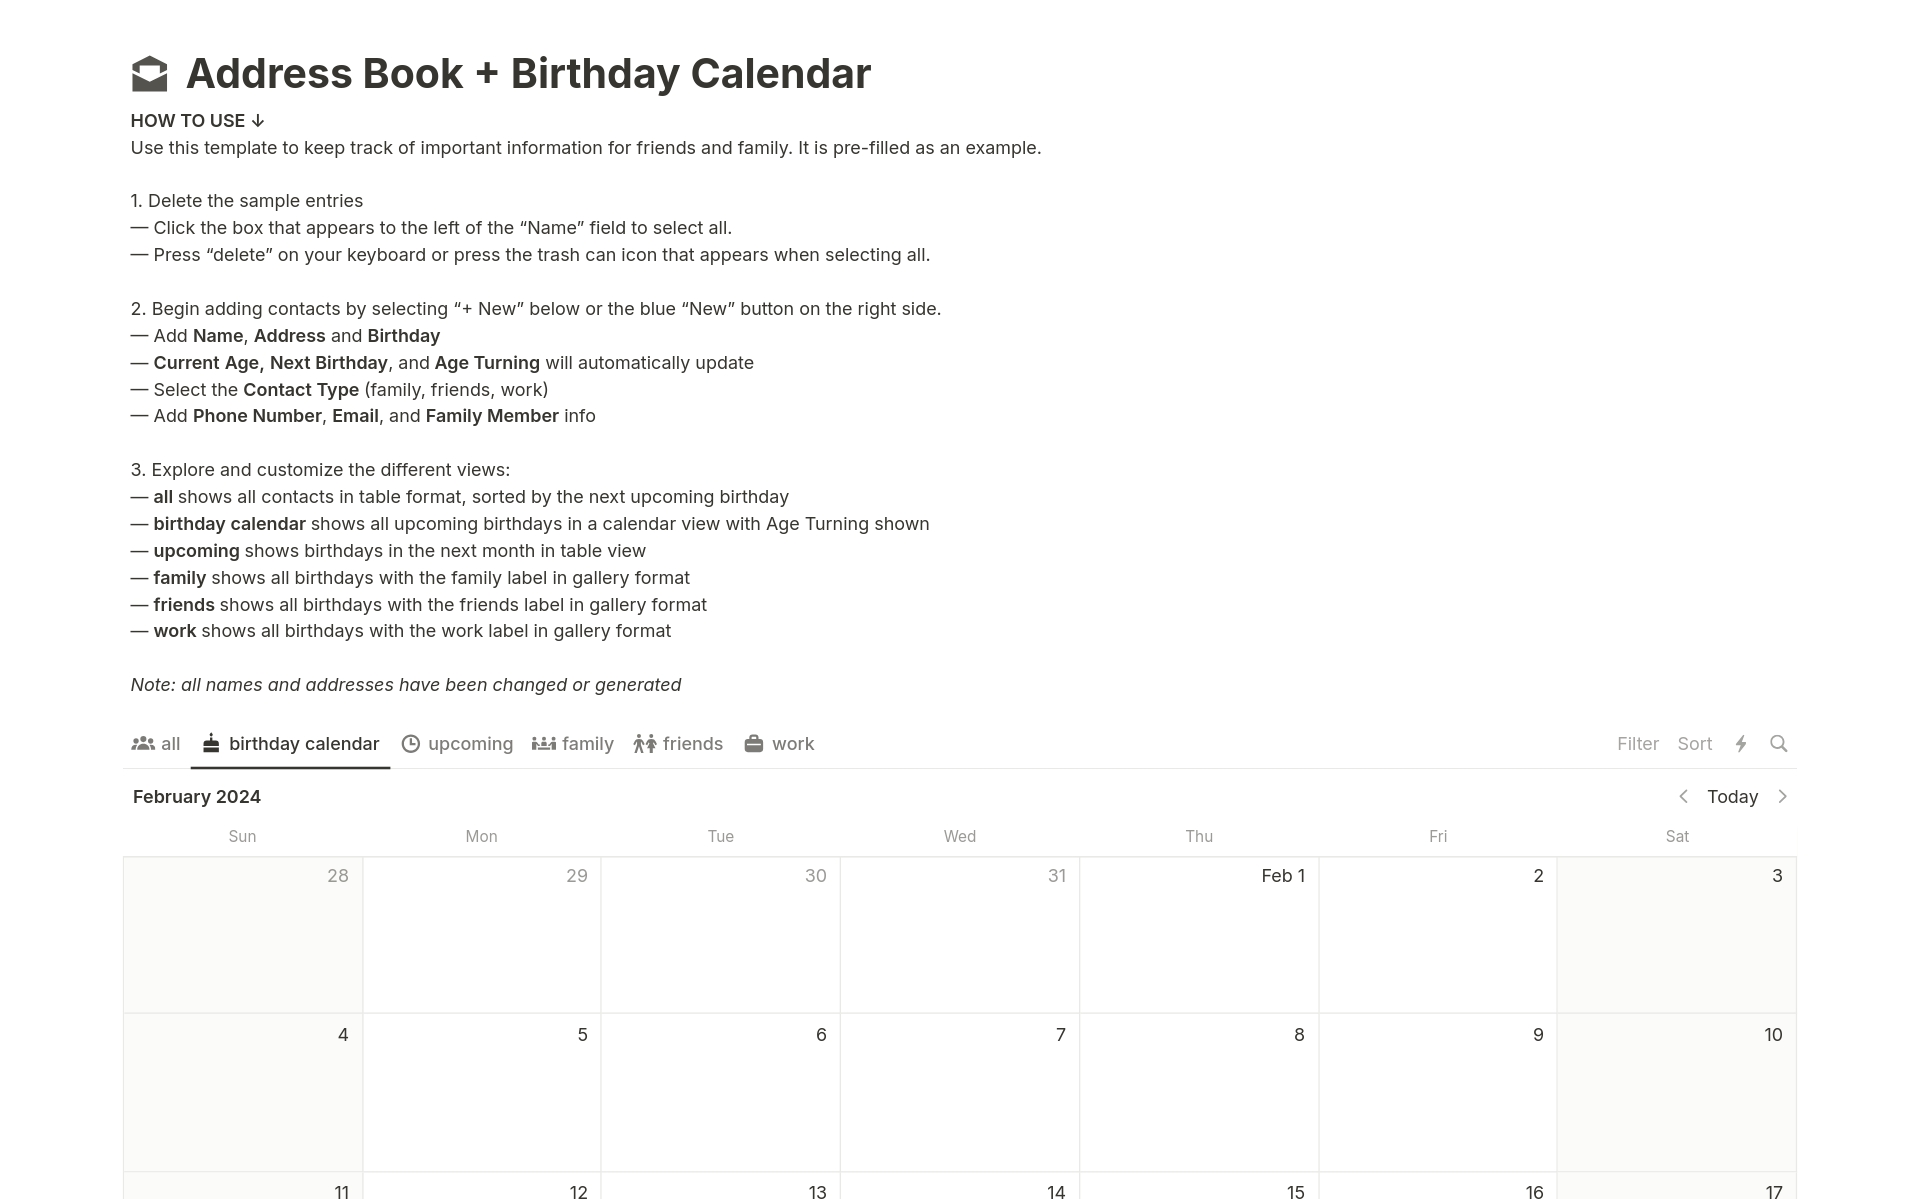 Digital address book and birthday calendar to keep track of important information for friends and family including: address, birthday, phone number, email, family members